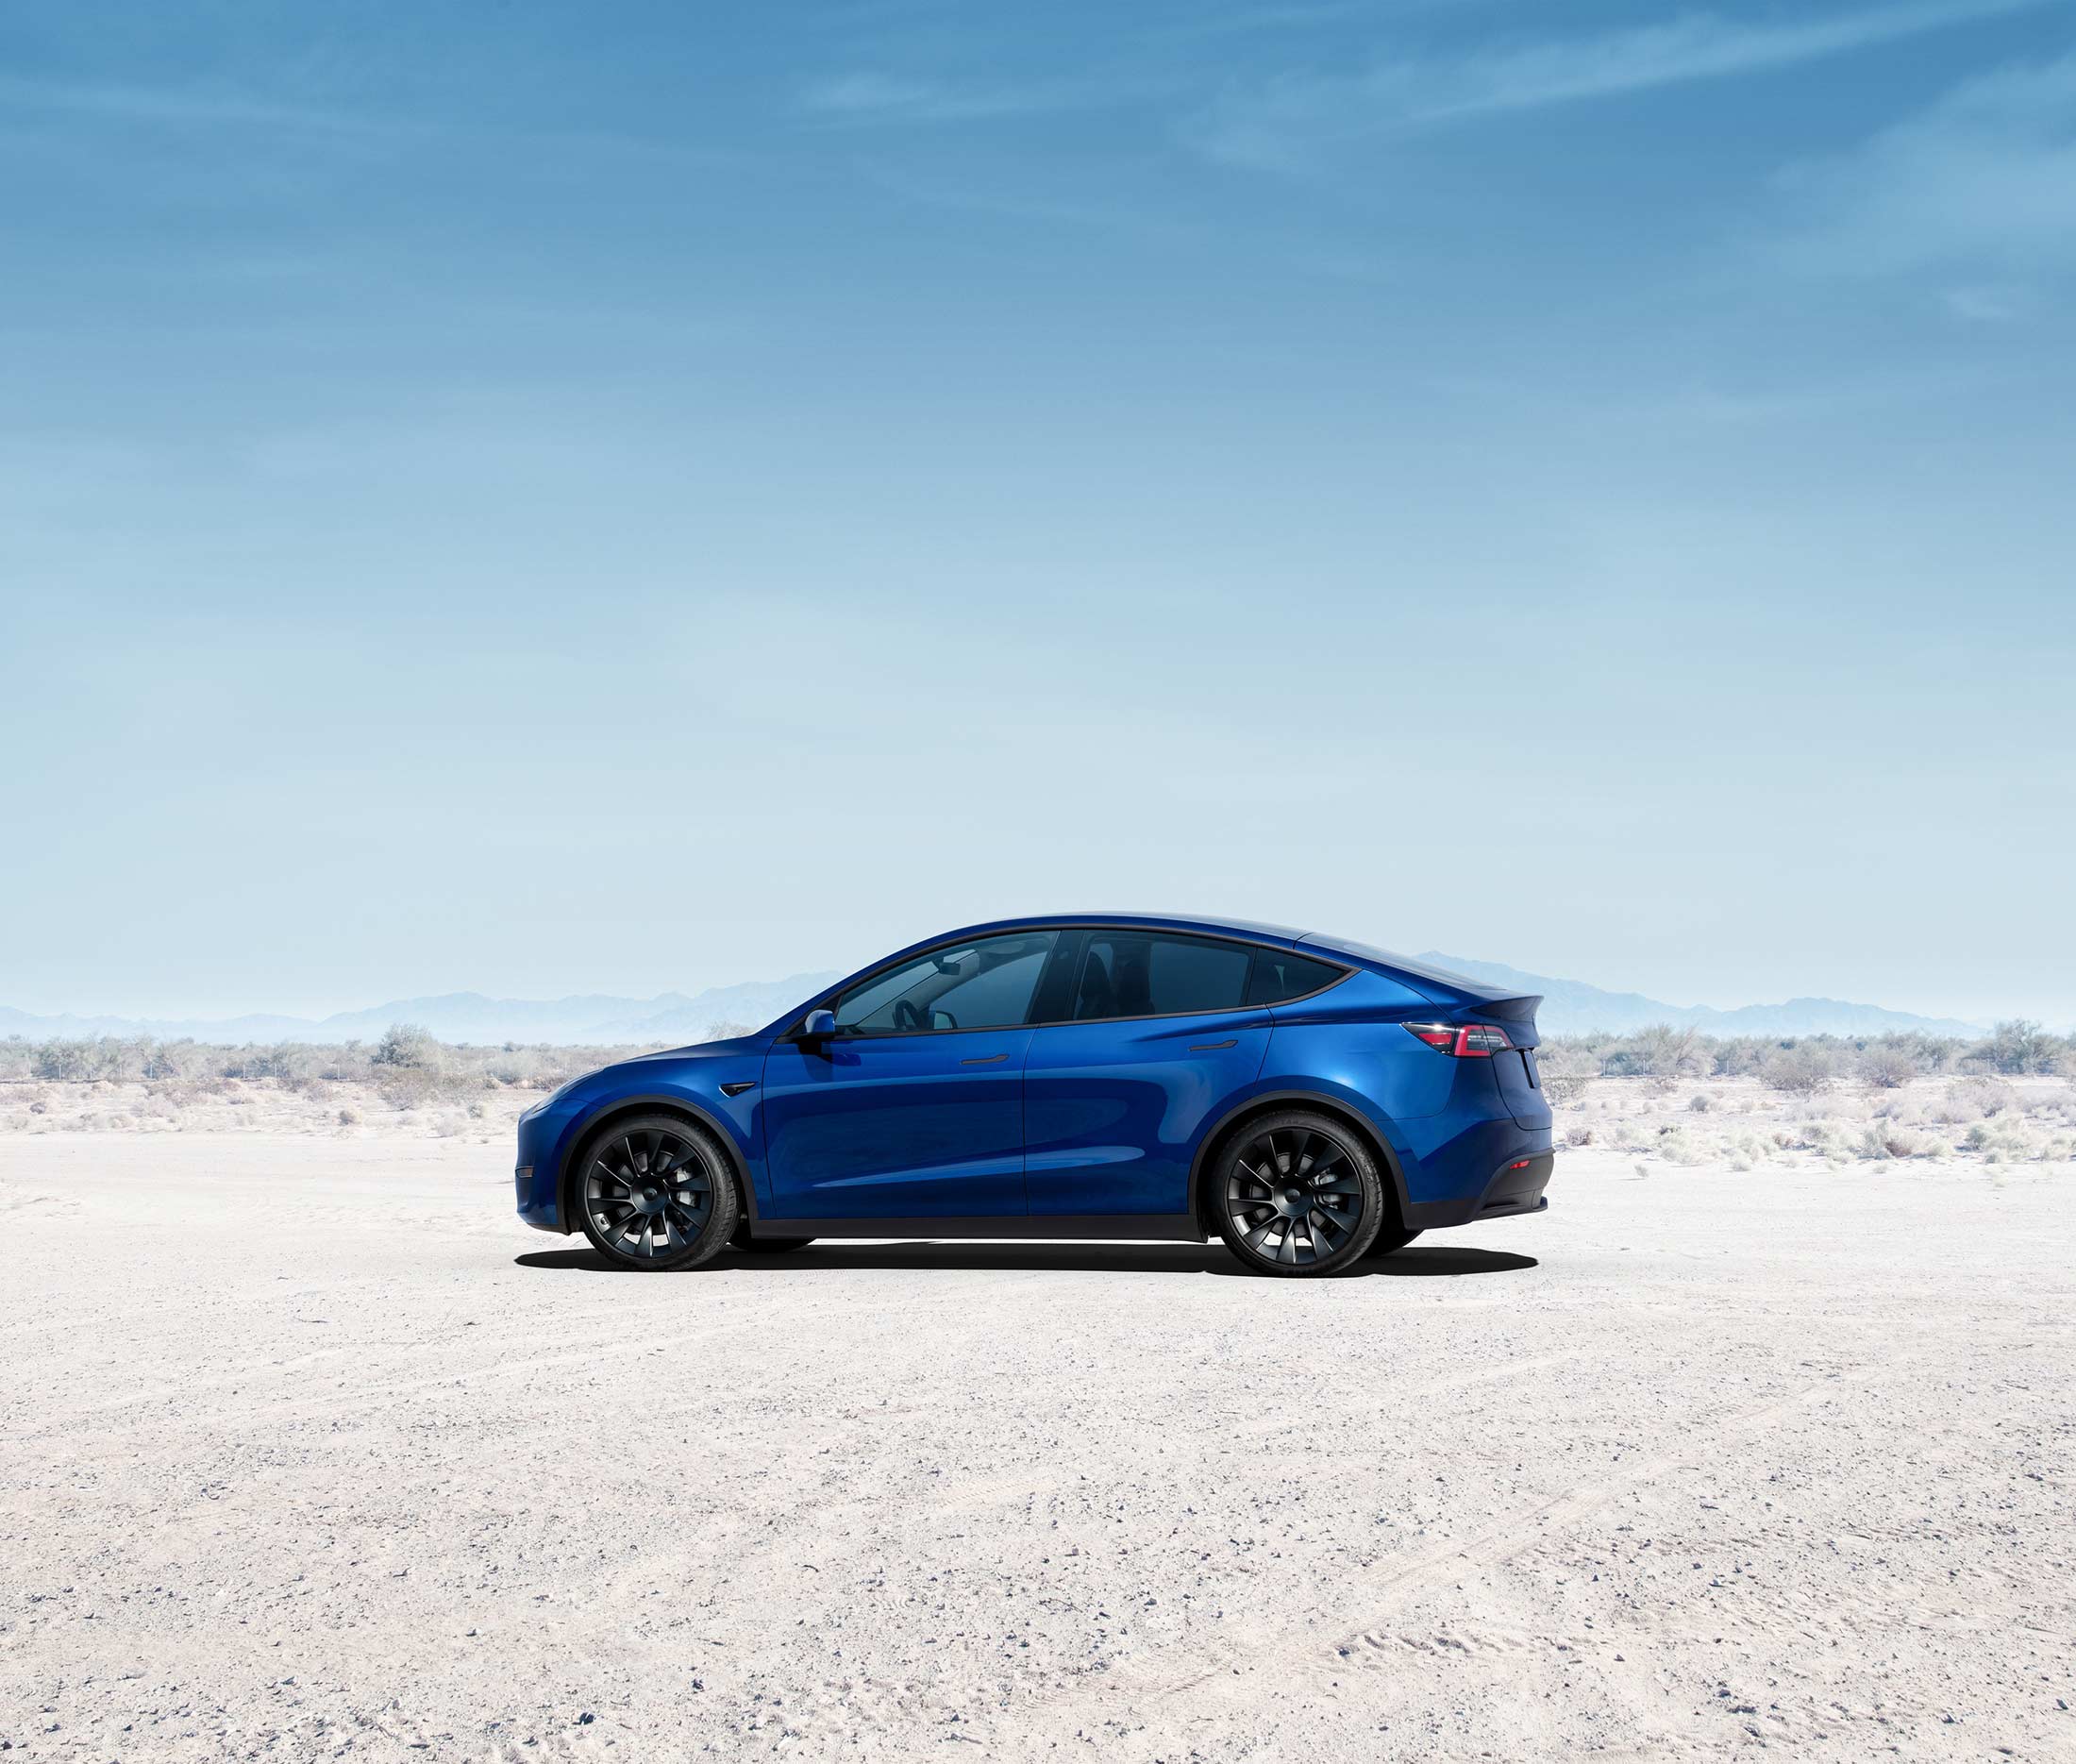 Tesla Model Y Price Cuts Mean Elon Musk's Either Disruptive or